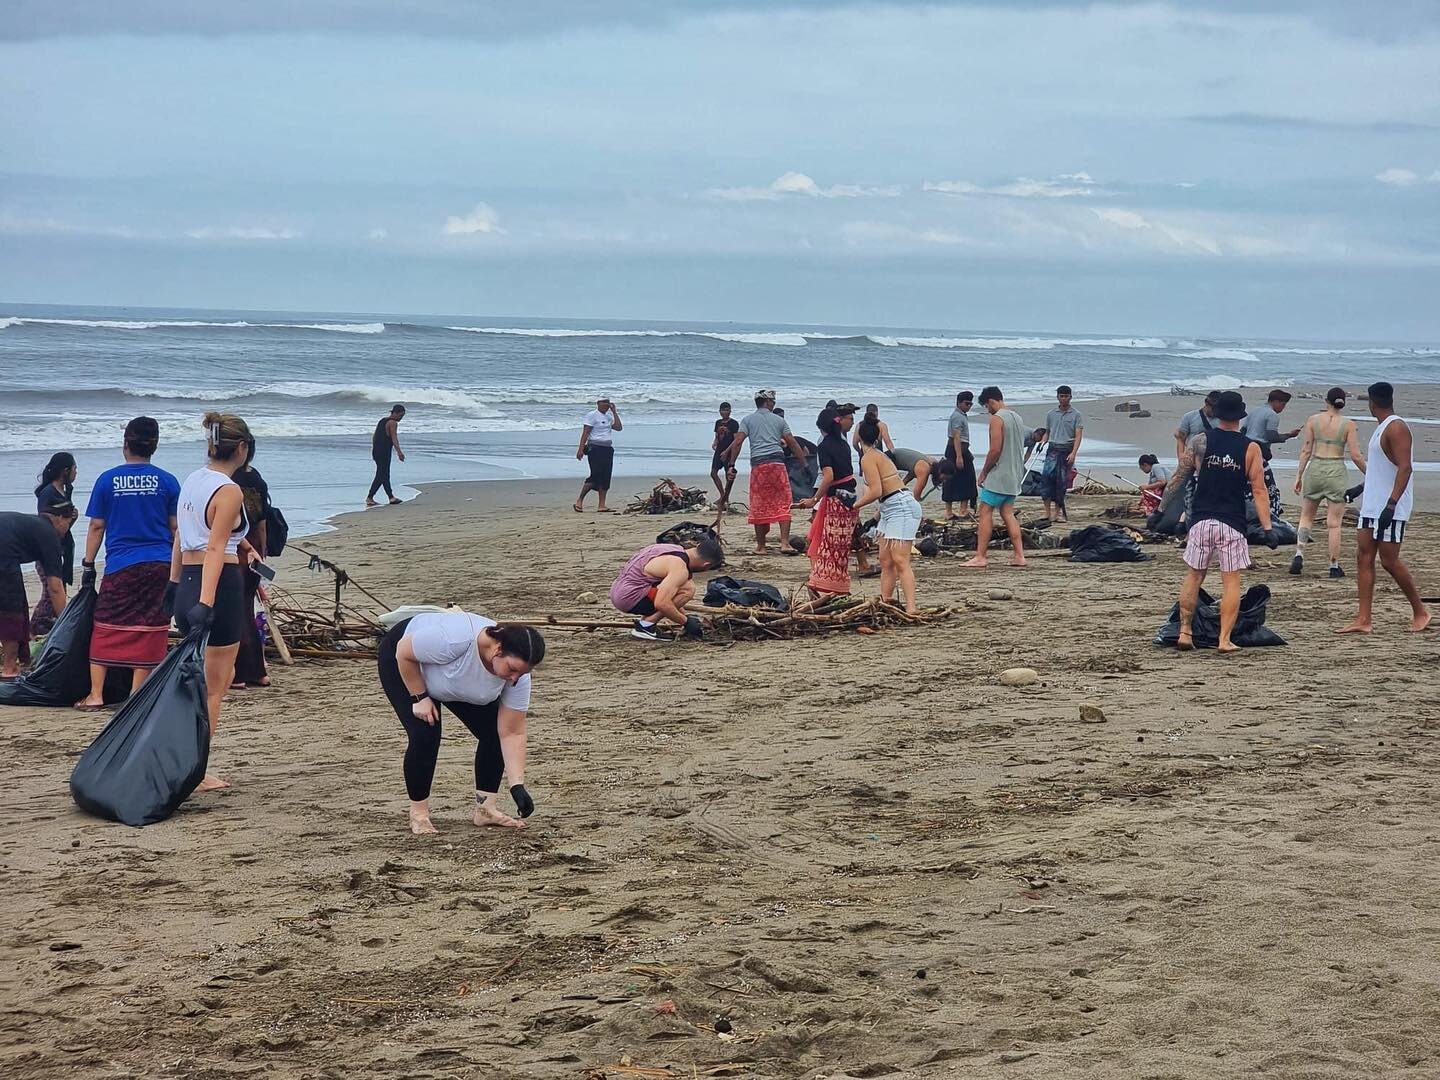 The age old saying - &ldquo;many hands make light work&rdquo; 

Our guests along with the team from @thehavenbaliberawa cleaned up a large portion of the beach in 45min. 

With Bali&rsquo;s rubbish pollution problems in the rainy season, it&rsquo;s g